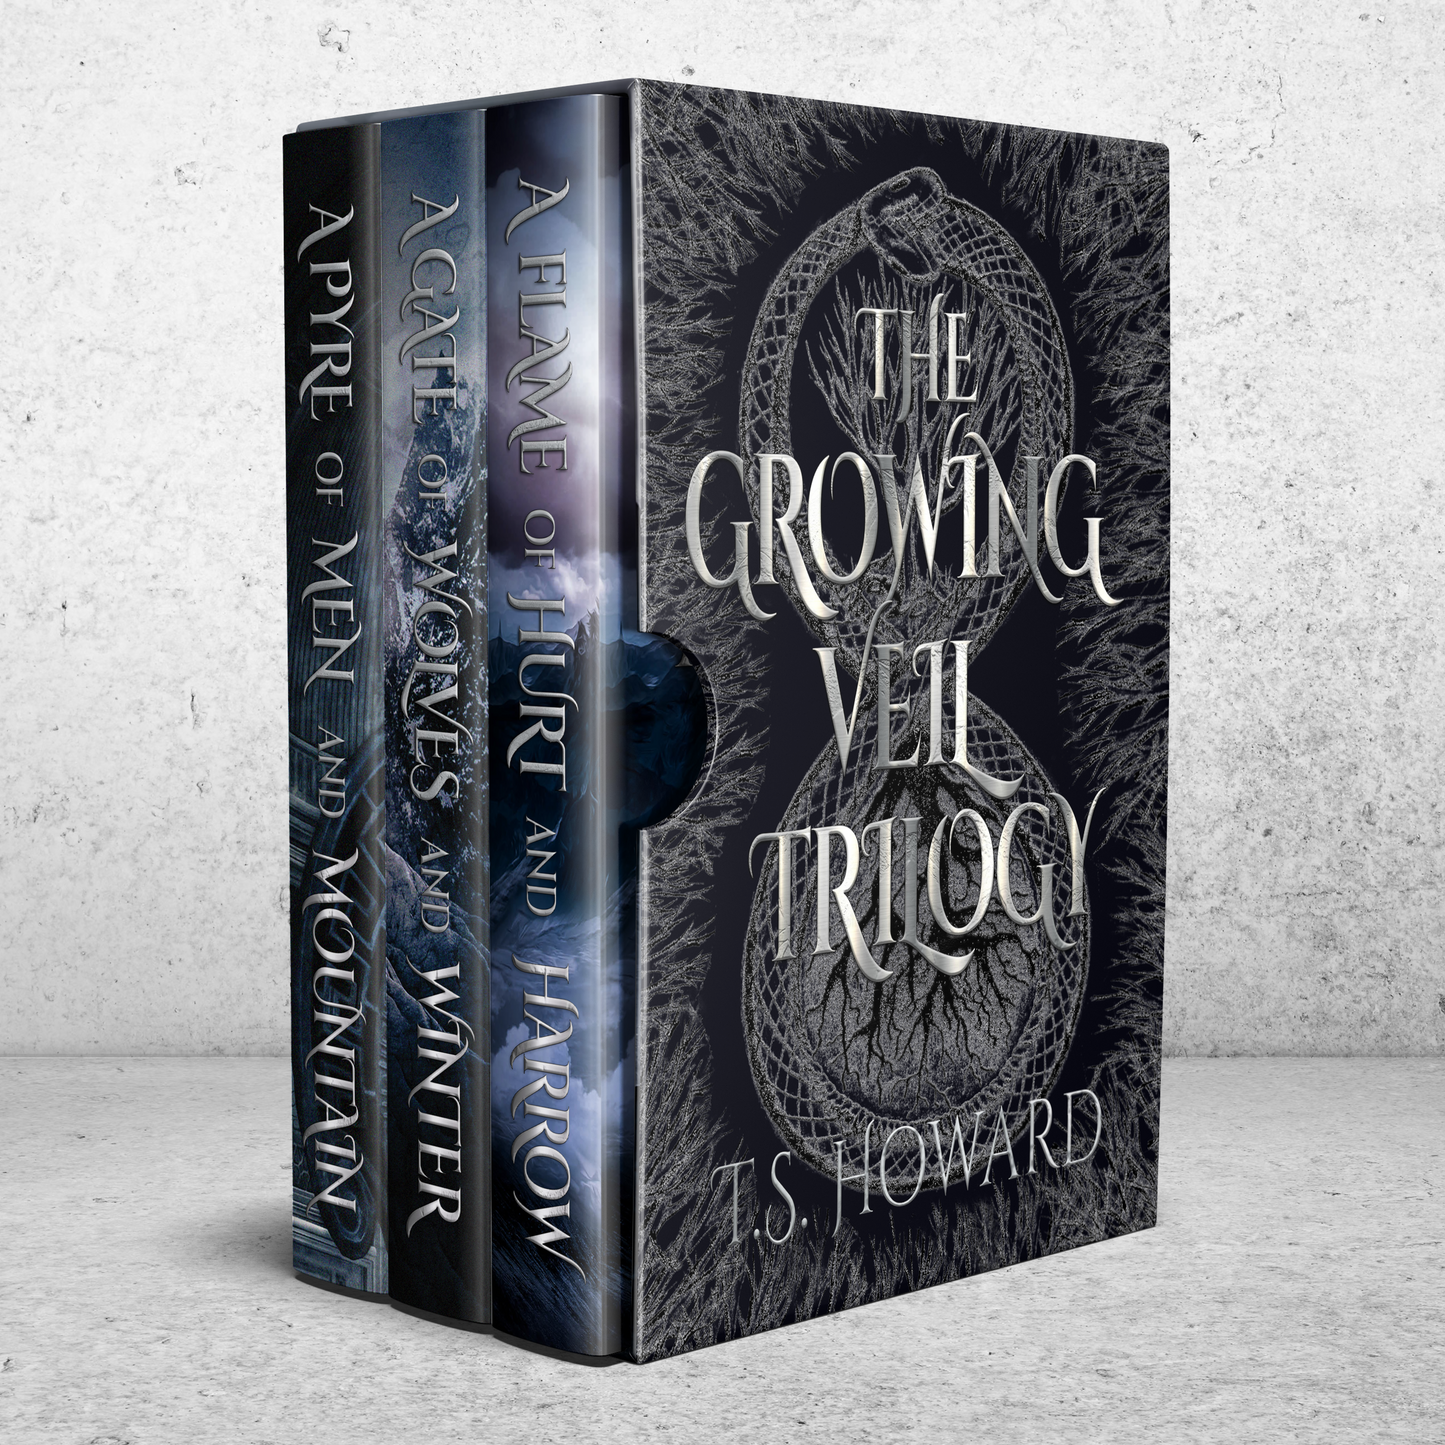 The Growing Veil Complete Trilogy eBook